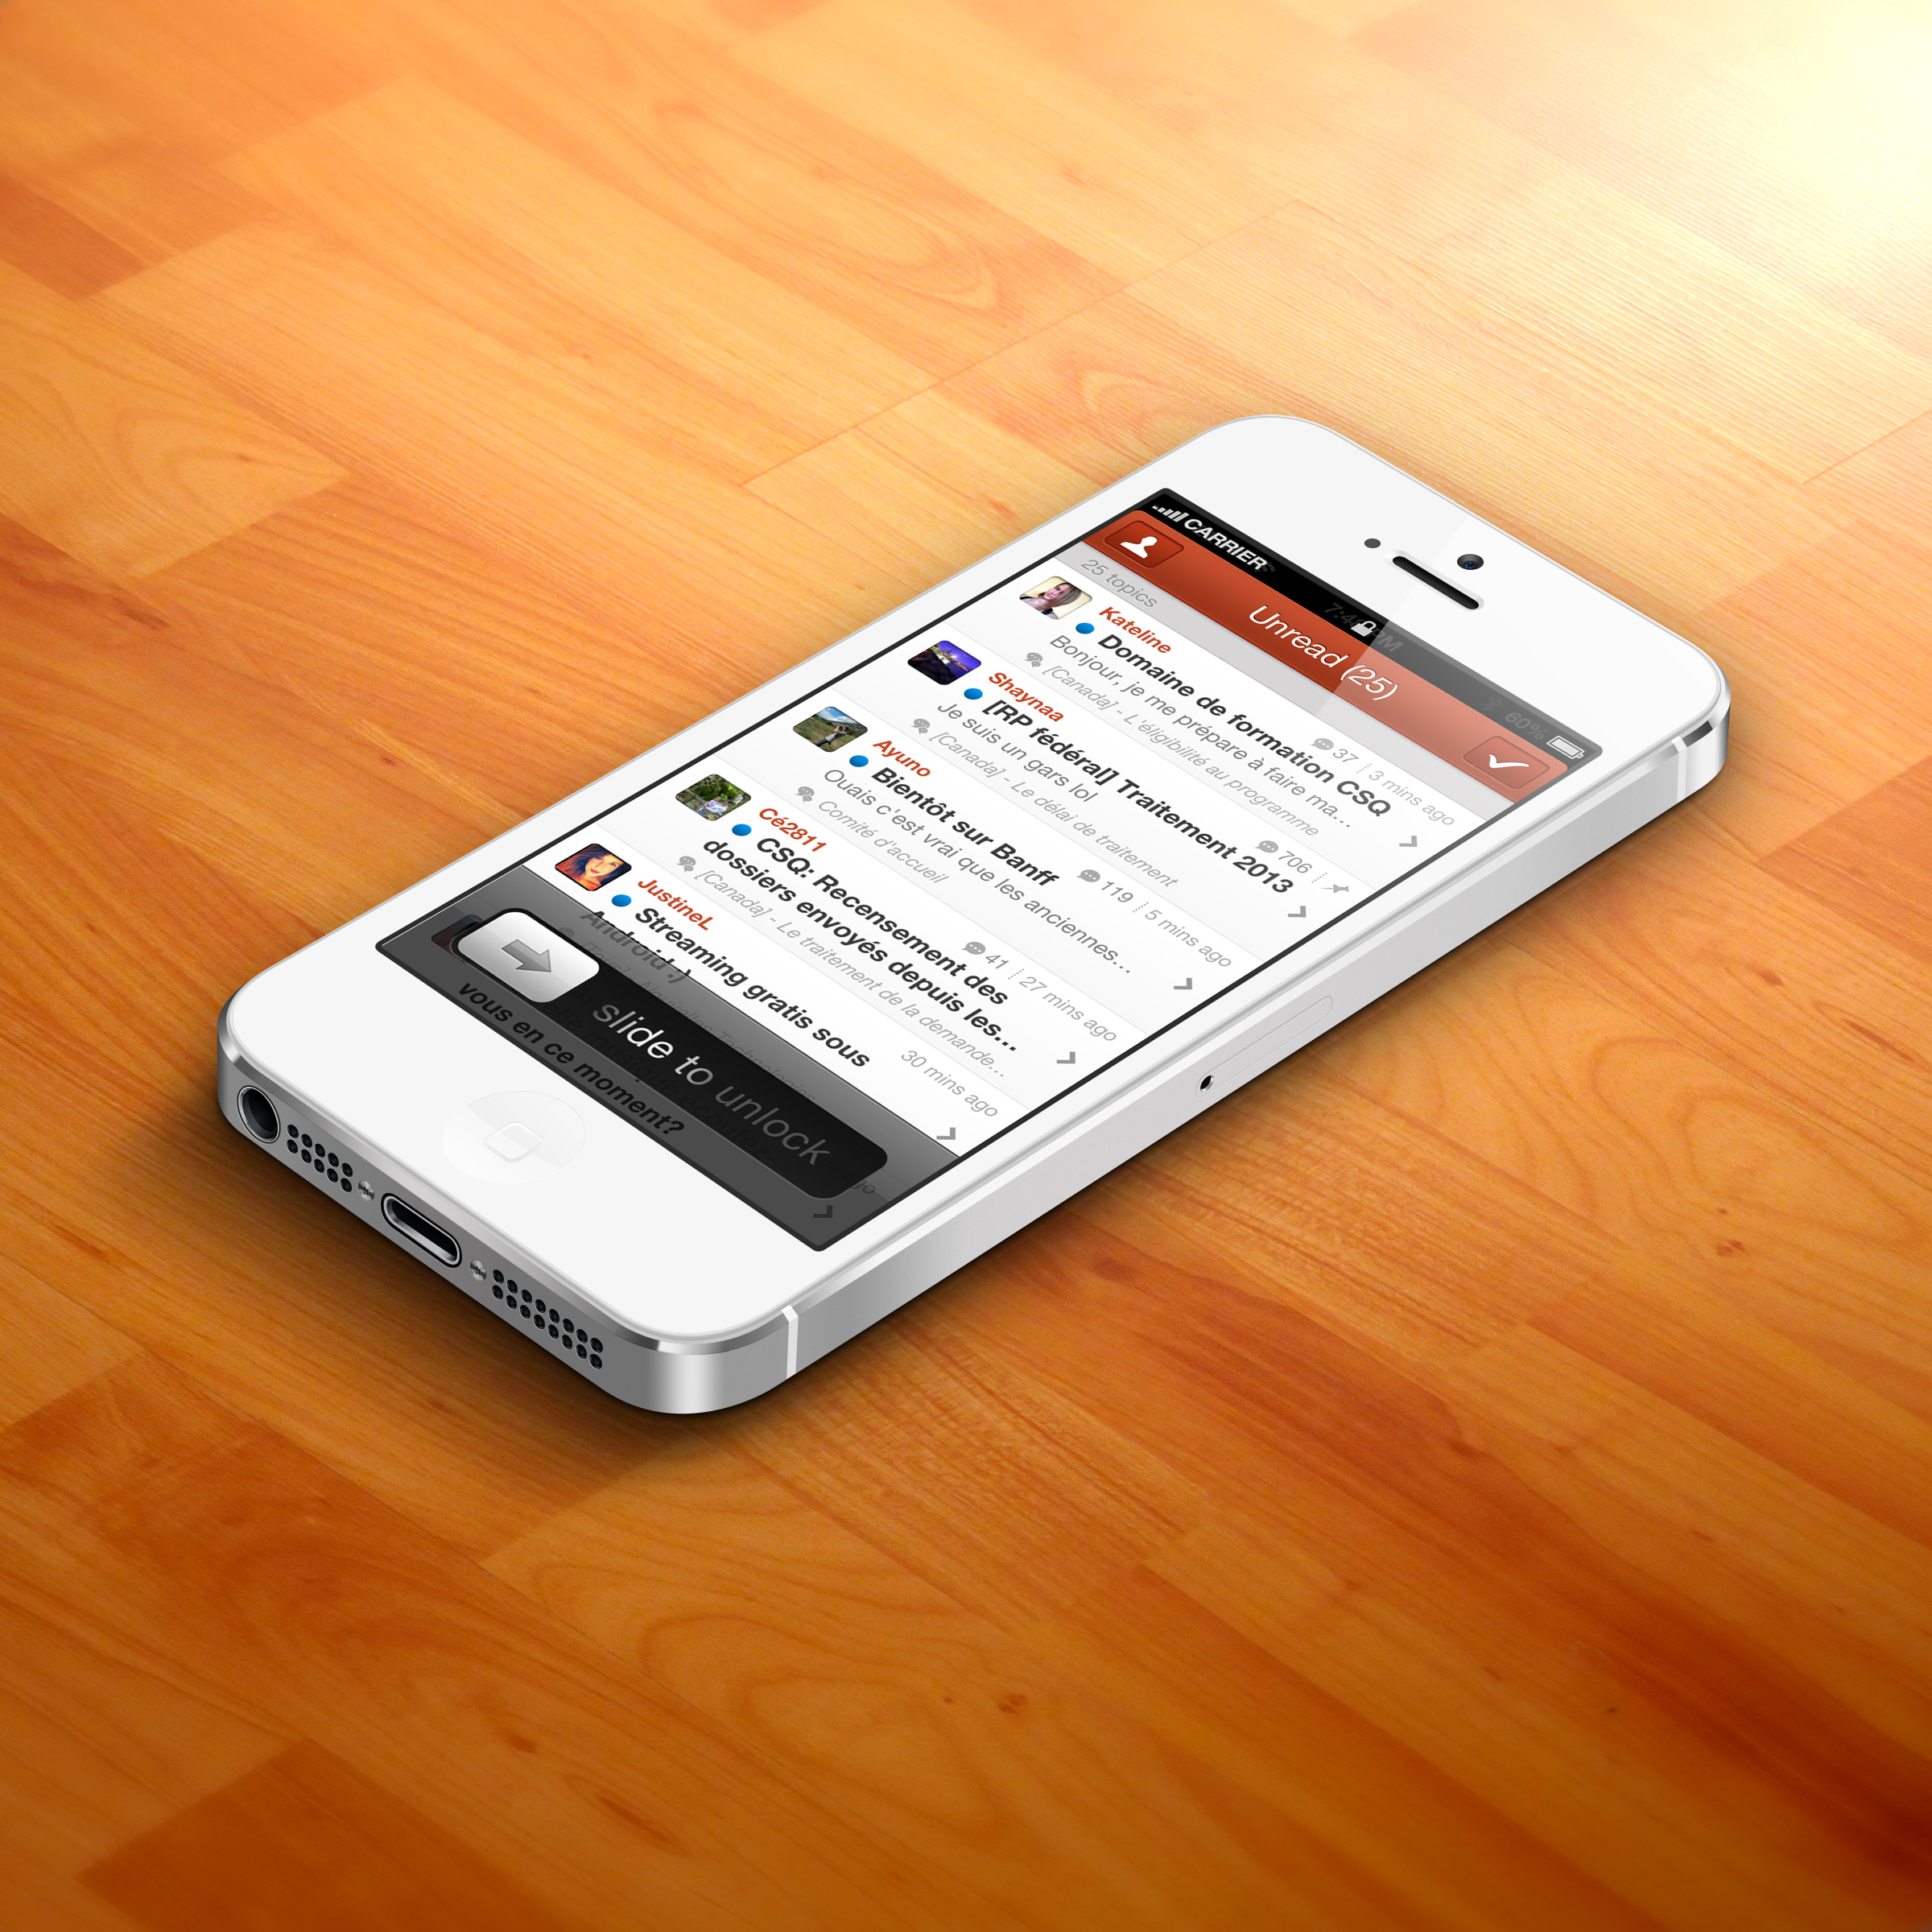 Nom : iPhone-5-White-3D-view-MockUp.jpg
Affichages : 1116
Taille : 2,98 Mo